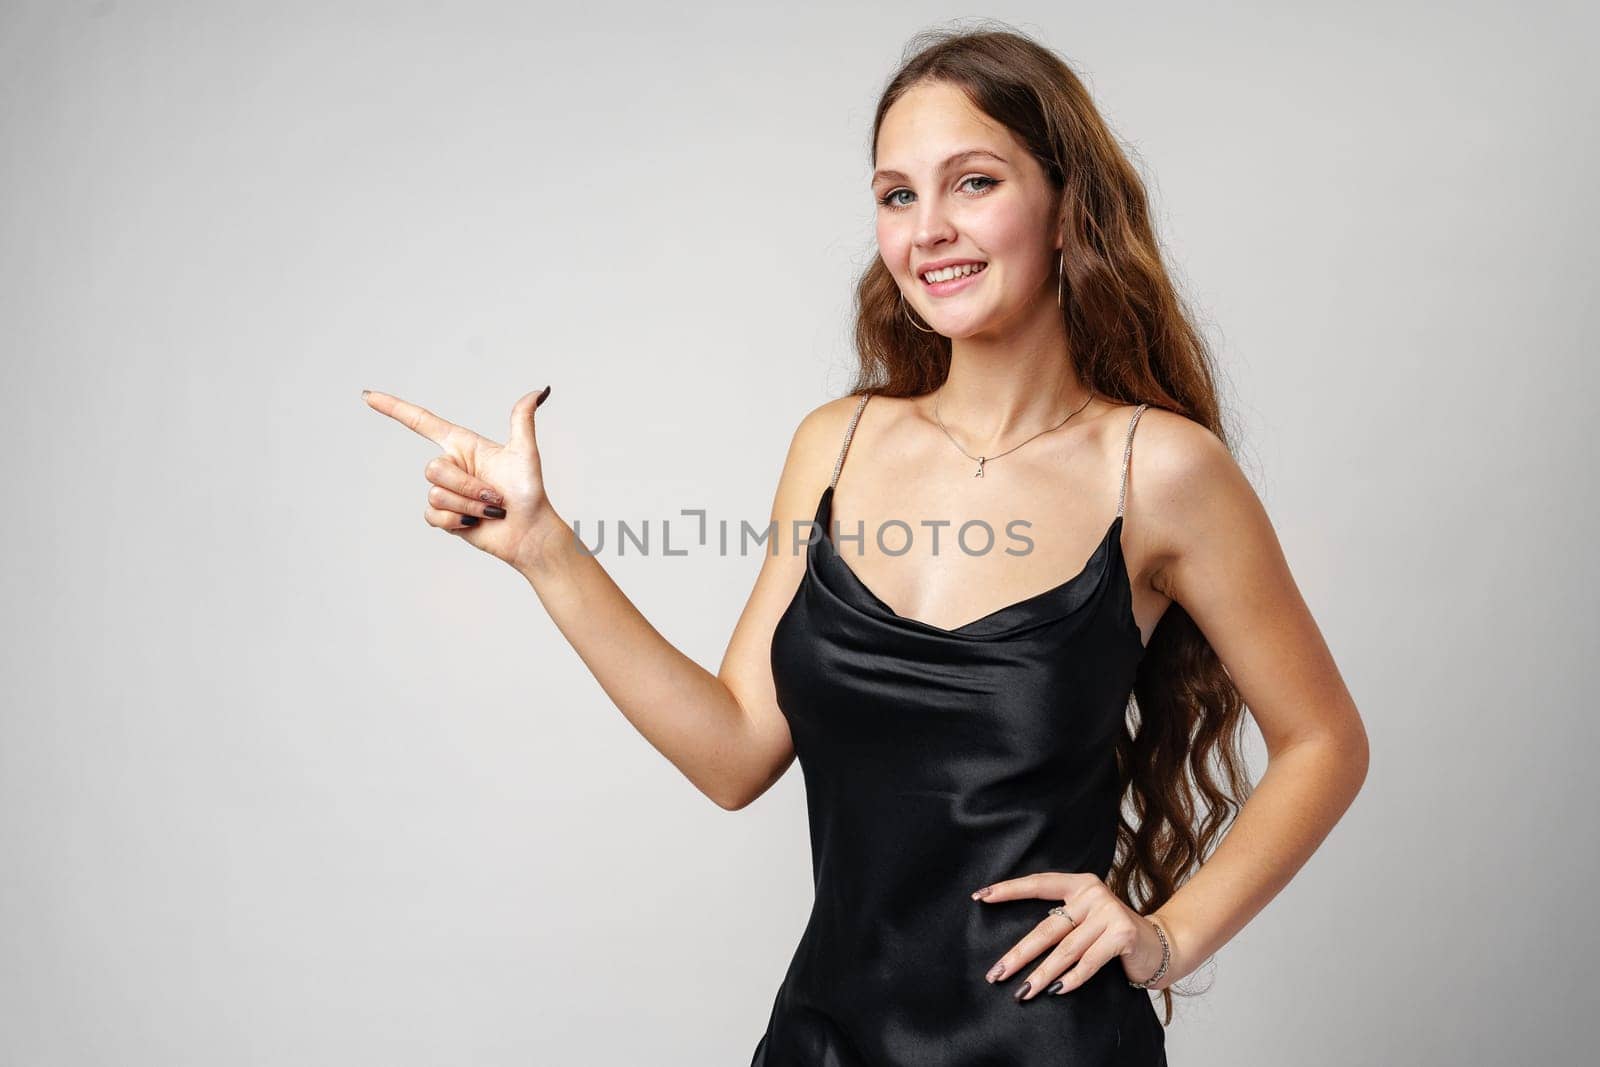 A woman wearing a black dress is pointing at an object or direction. She appears to be gesturing with determination or surprise.